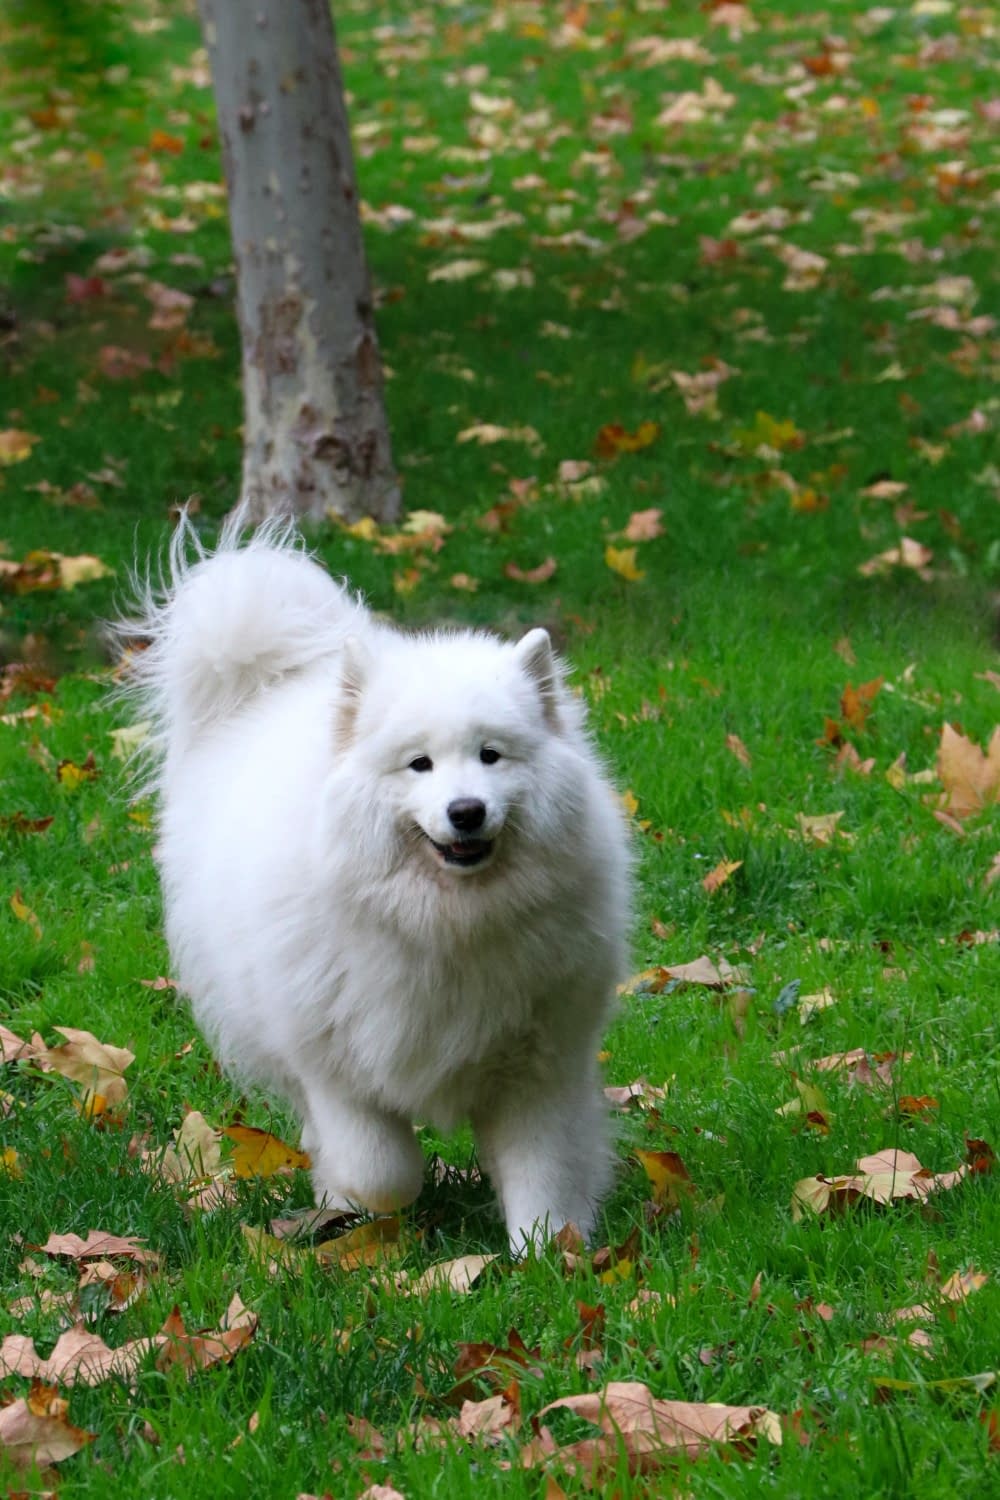 a white fluffy dog stood on some grass with leaves on with a tree in the background